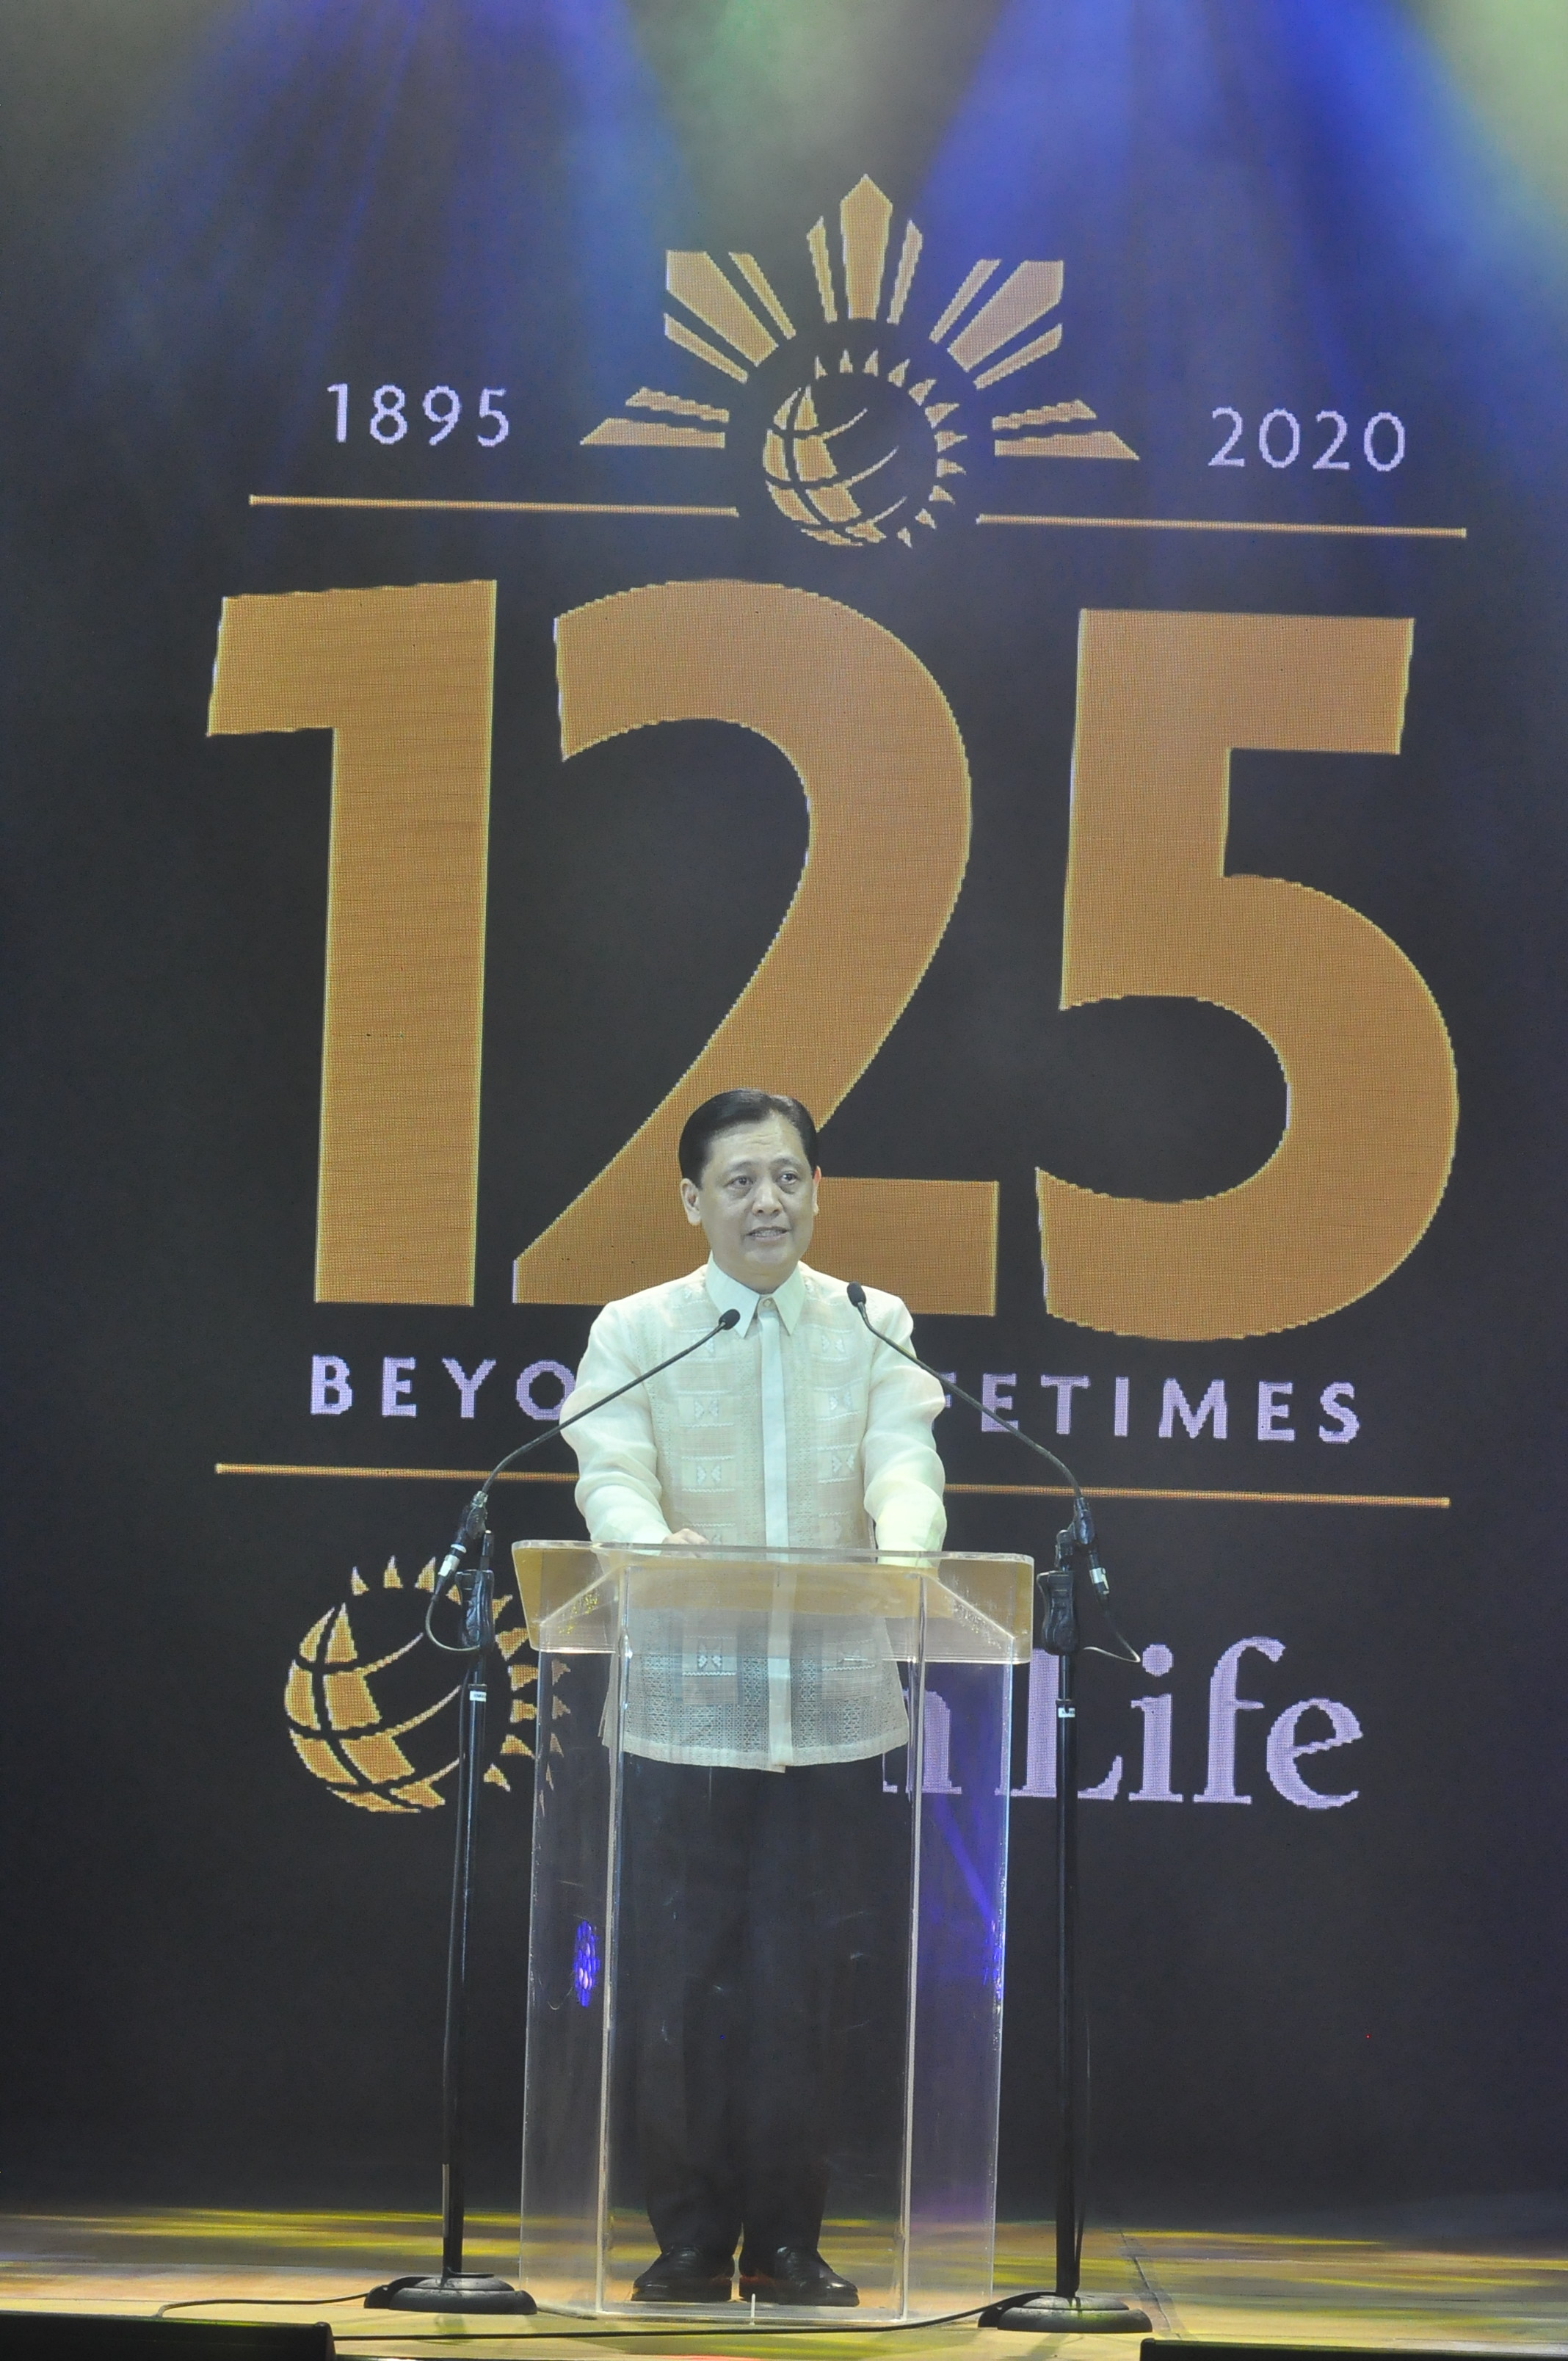 Sun Life Philippines' chief executive officer and country head Benedicto Sison at Sun Life's 125th anniversary celebration.